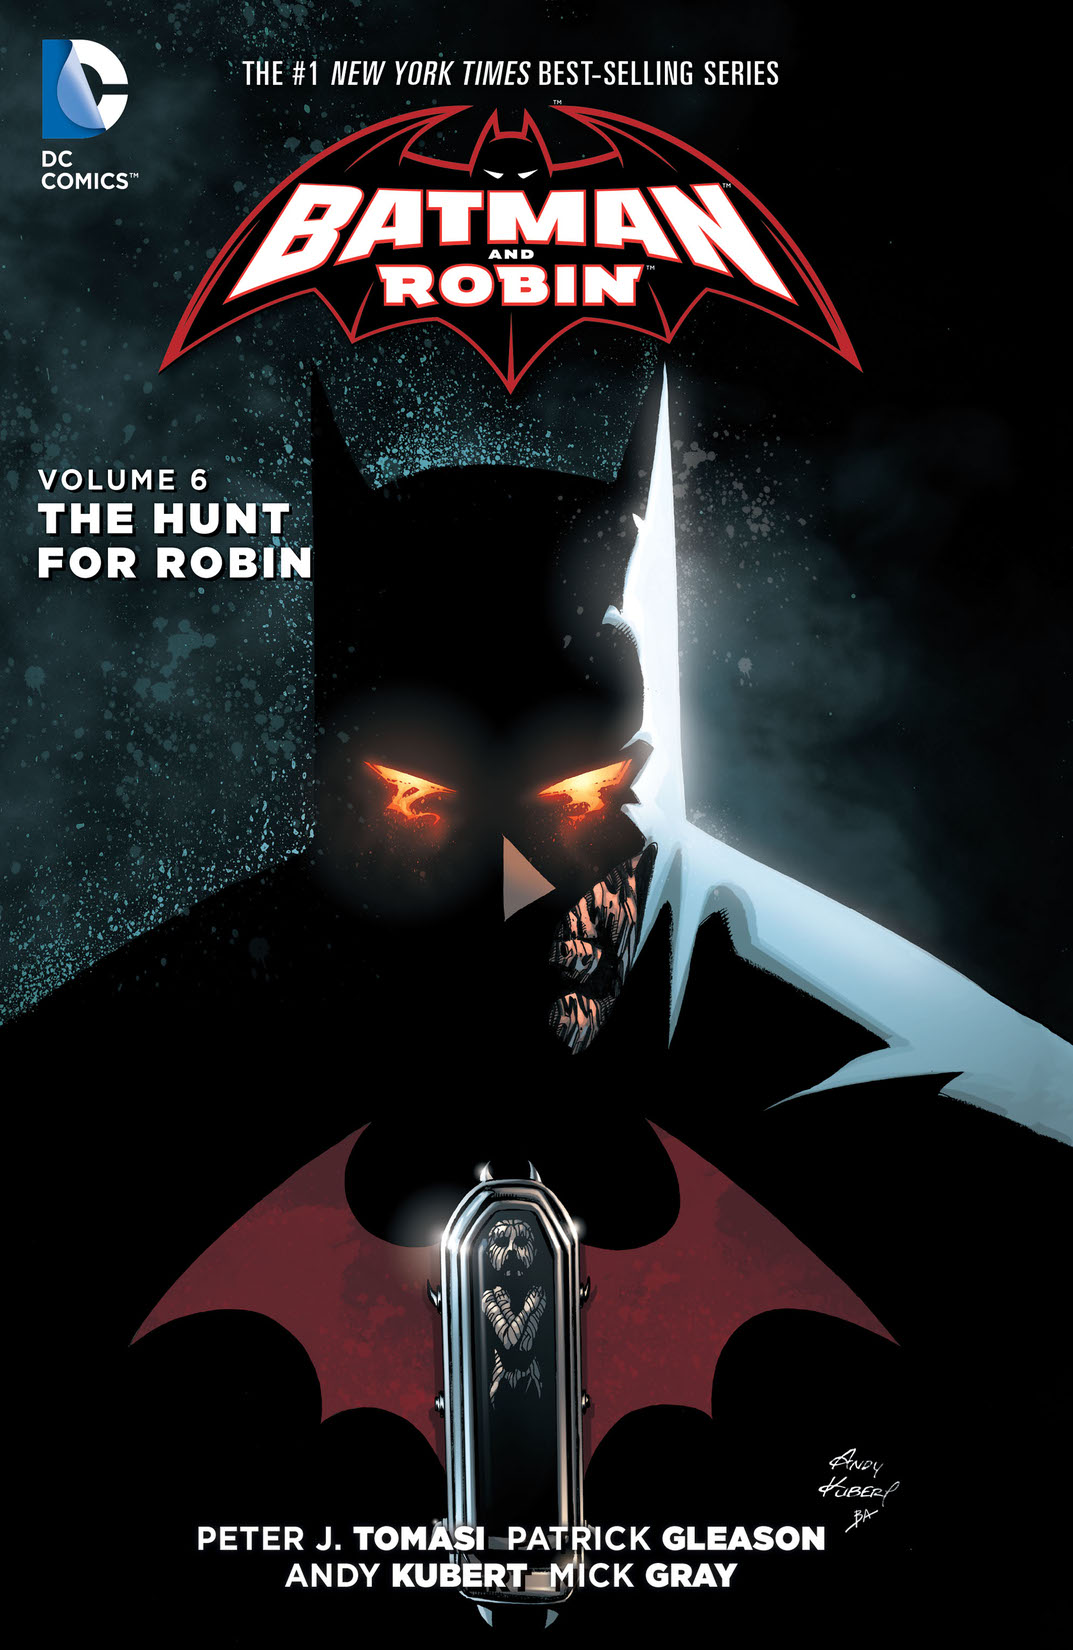 Batman and Robin Vol. 6: The Hunt for Robin preview images